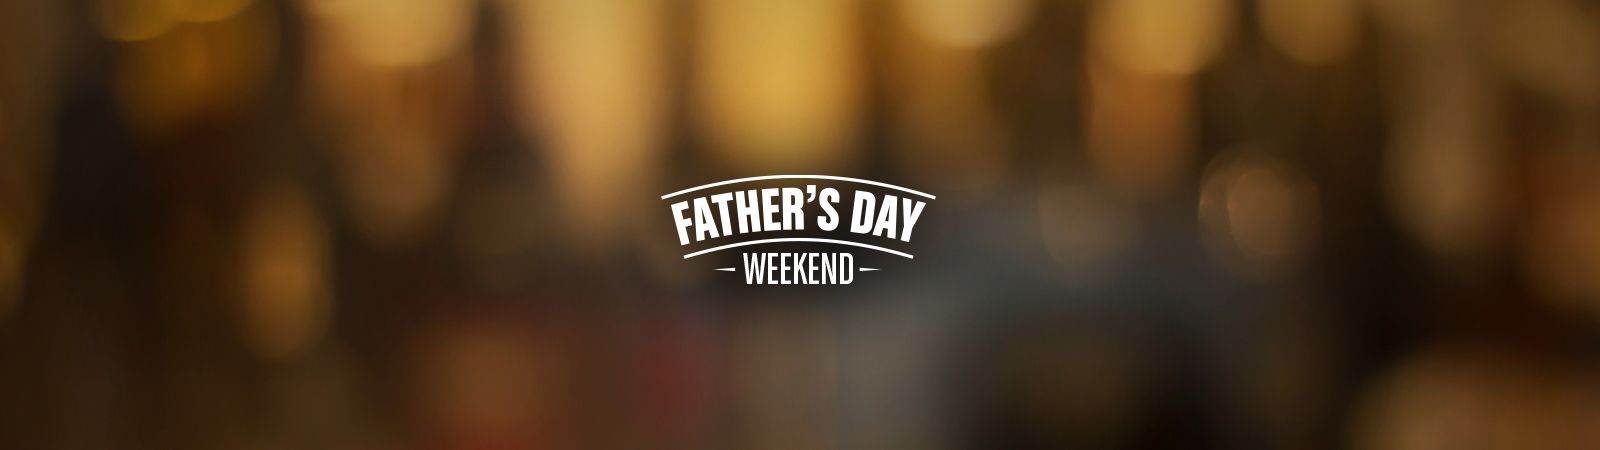 Father's Day weekend